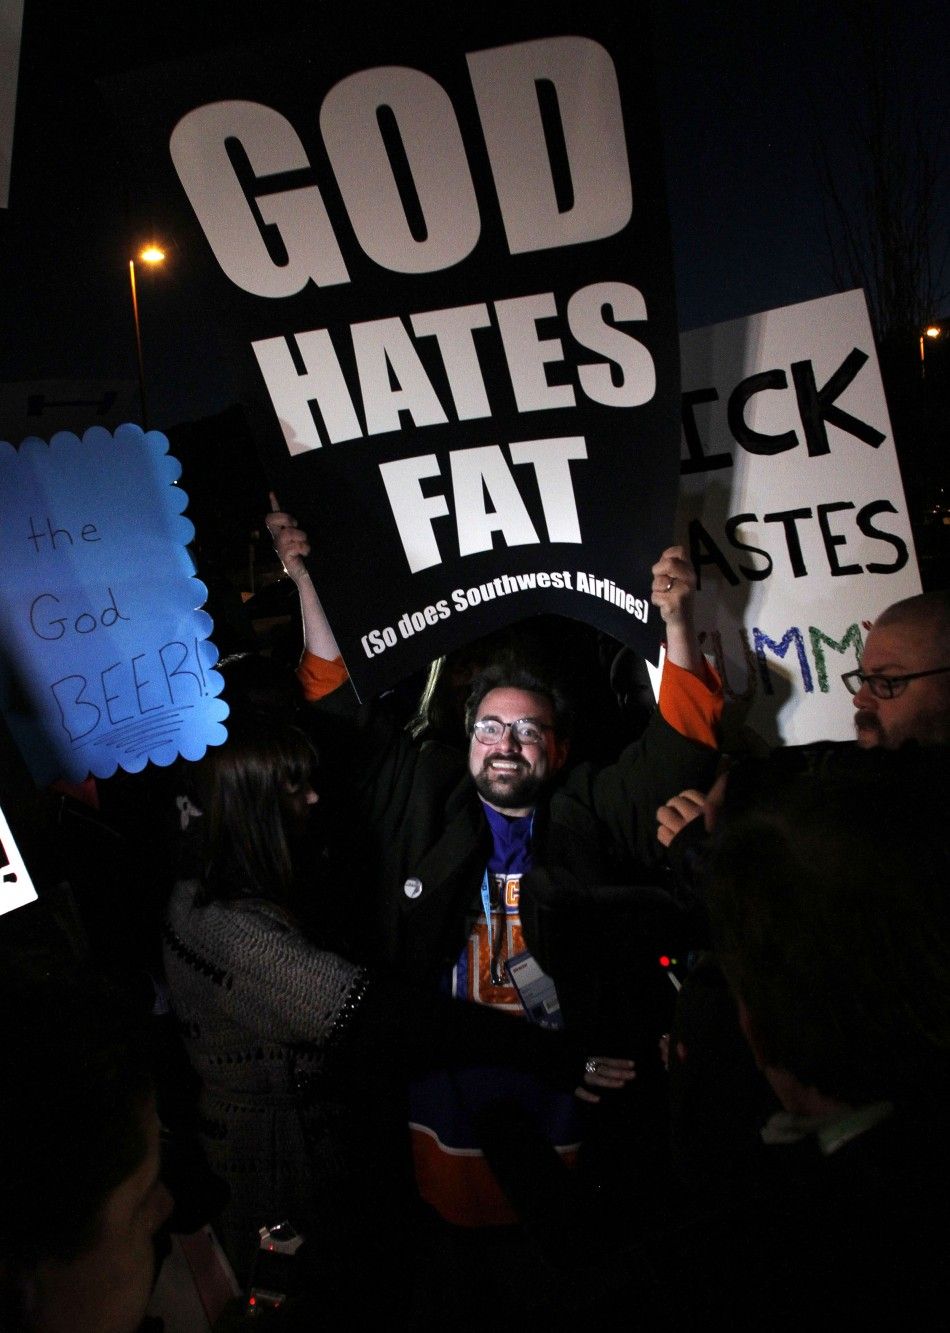 Director of movie quotRed Statequot Smith joins counter-protest as members of Westboro Baptist church protest his film screening at Sundance Film Festival in Utah